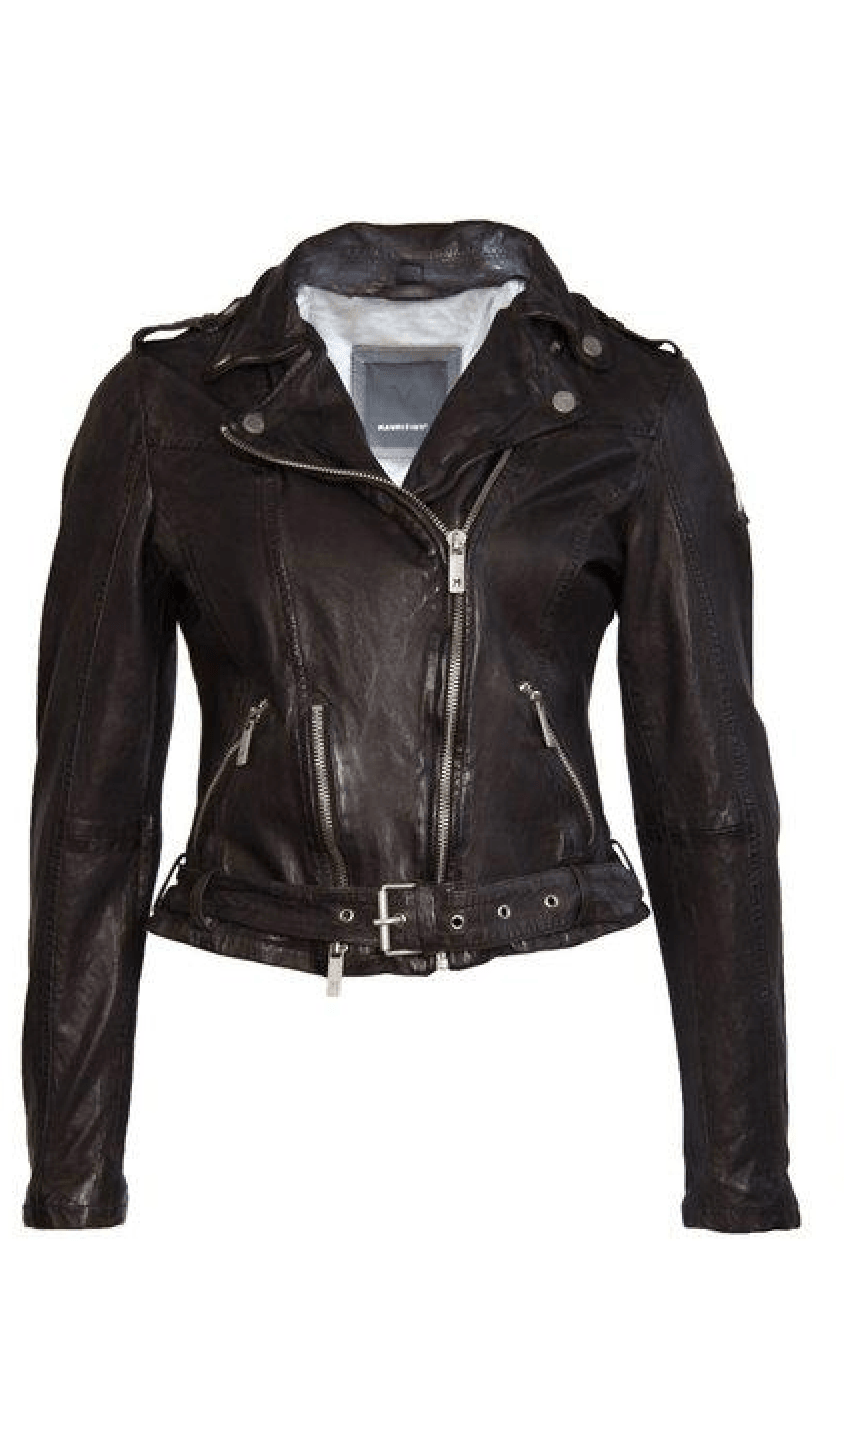 Wild 2 Leather Jacket by Mauritius - various colors - Haven